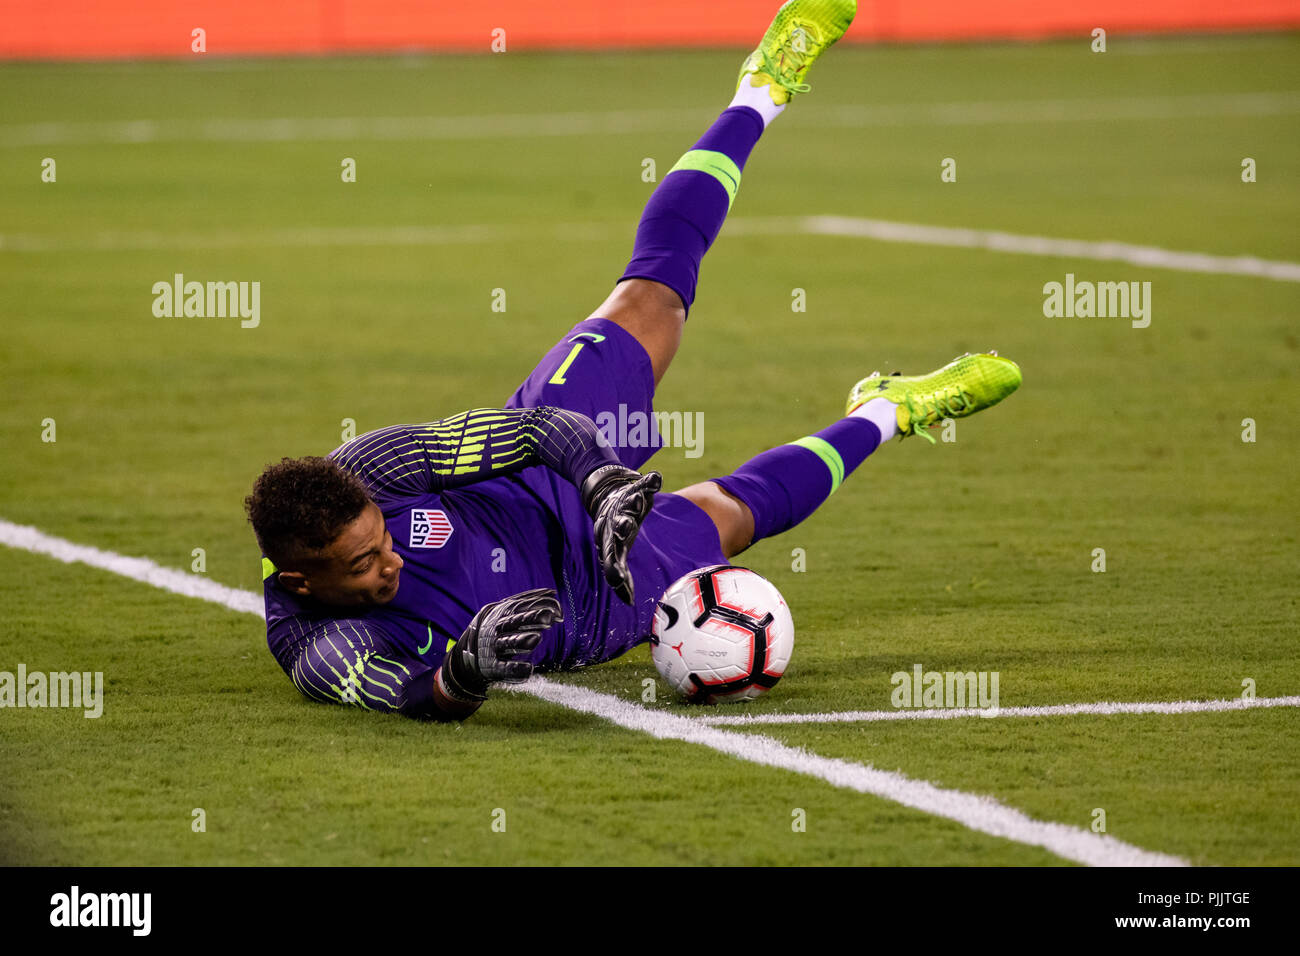 East Rutherford, NJ, USA. 7th Sept, 2018. Zack Steffen (1) dives to save a corner kick in the second half of USA international friendly against Brazil. © Ben Nichols/Alamy Live News Stock Photo